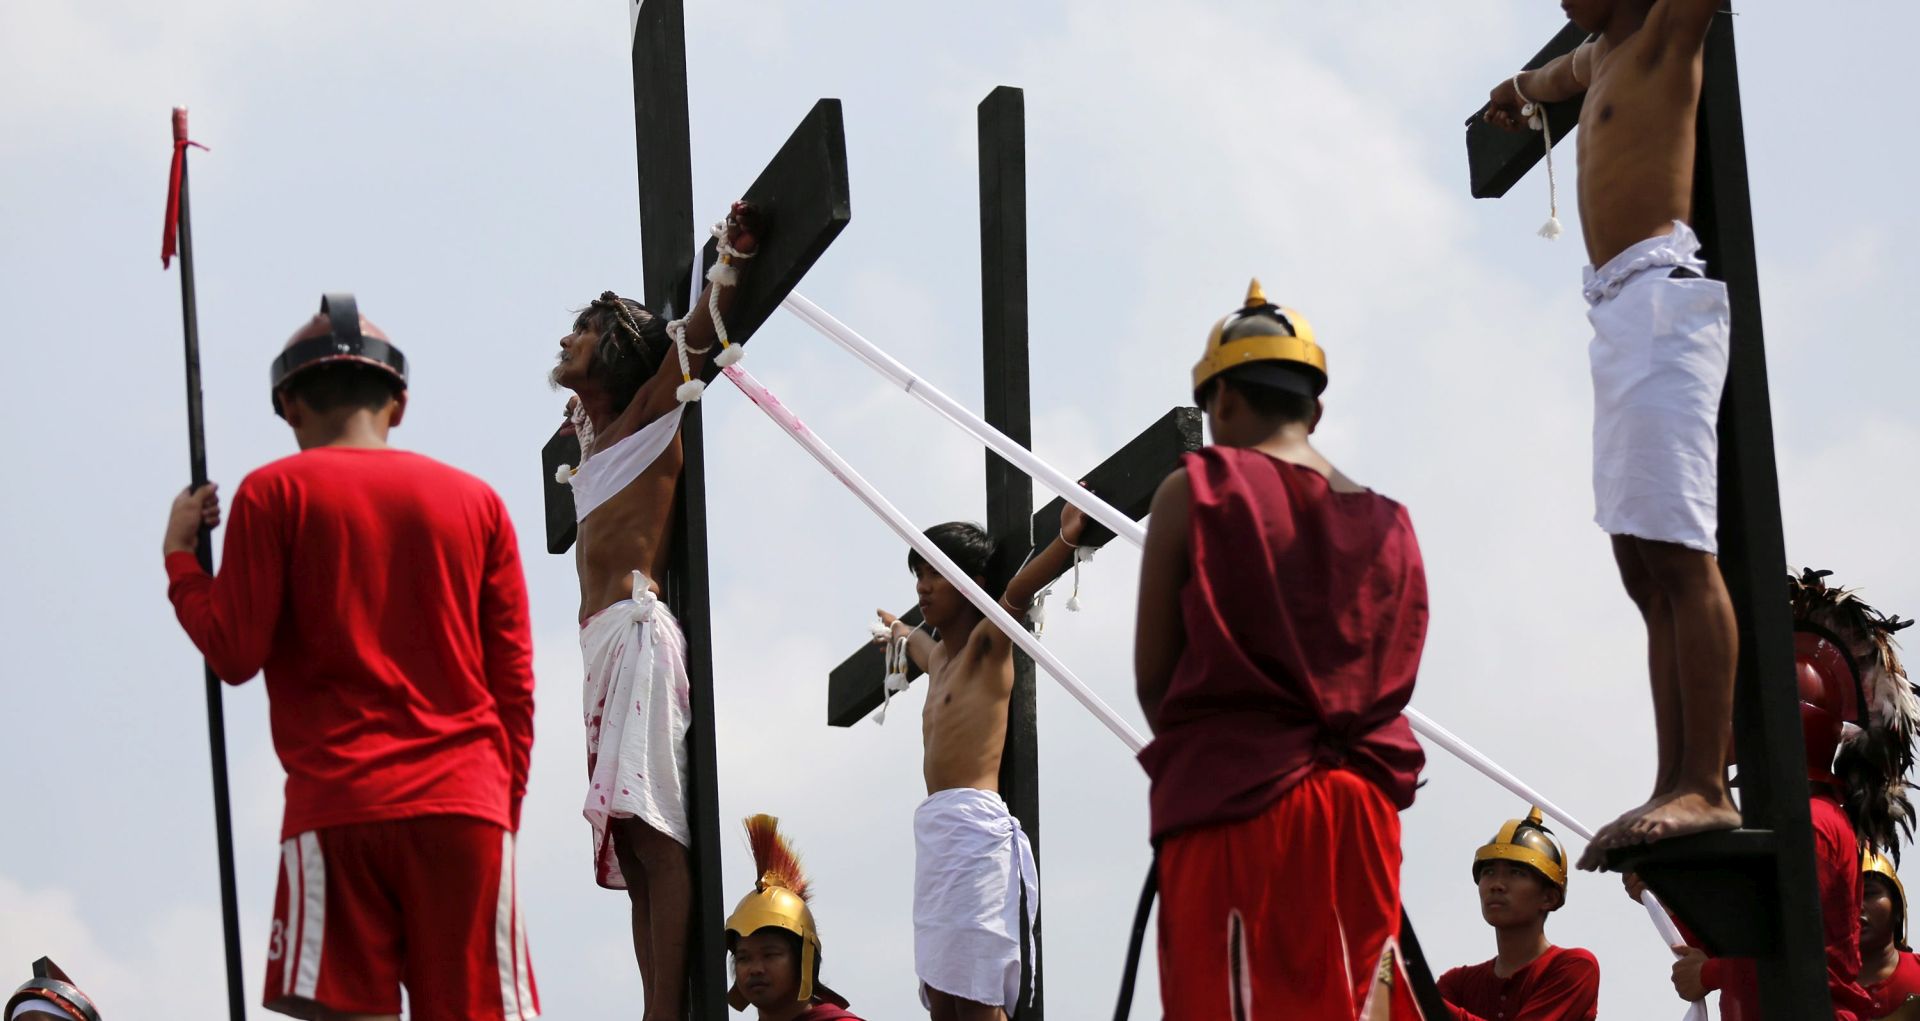 epa05230139 The scene of the crucifixion of Jesus Christ is re-enacted by villagers during the religious rites on Good Friday in San Pedro Cutud village, San Fernando city, north of Manila, Philippines, 25 March 2016. Thousands of Catholic devotees witnessed dozens of men who were nailed to wooden crosses or flogged themselves bloody in annual rituals re-enacting the crucifixion of Jesus Christ.  EPA/FRANCIS R. MALASIG